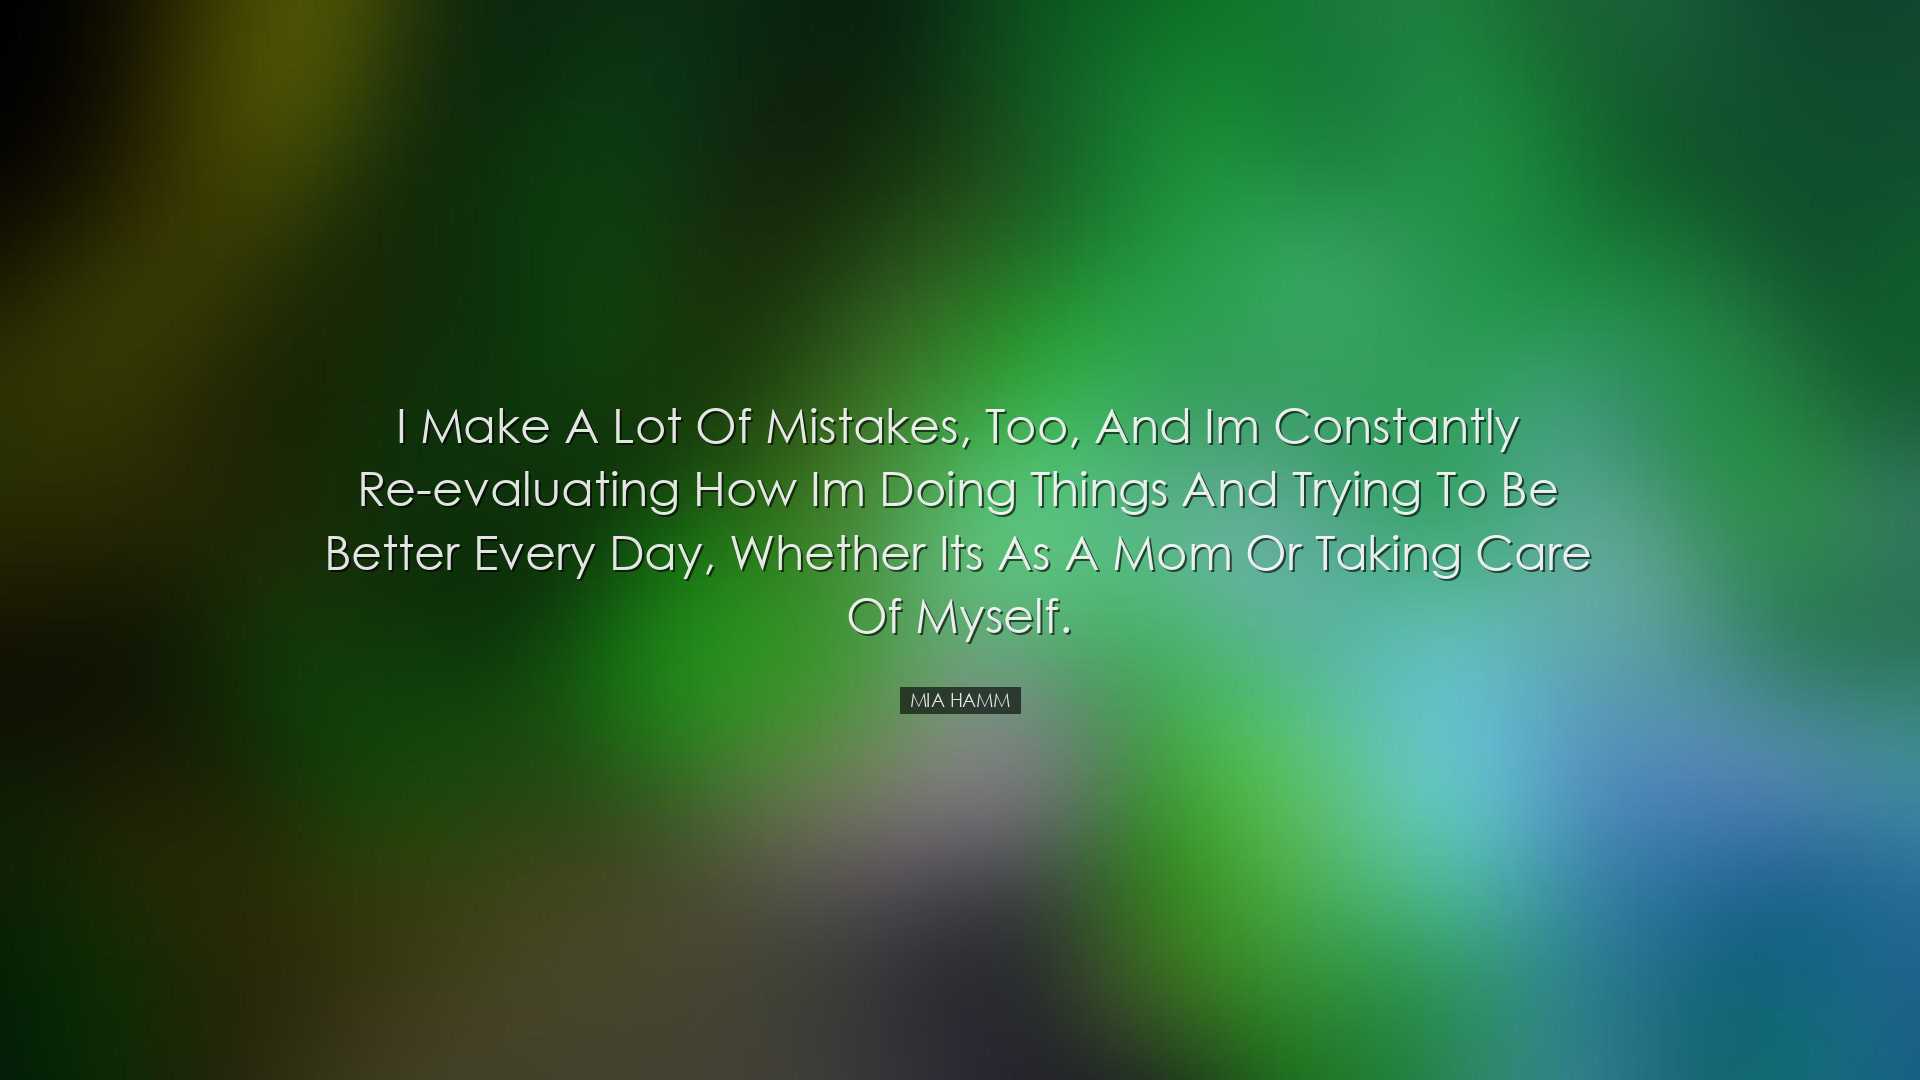 I make a lot of mistakes, too, and Im constantly re-evaluating how